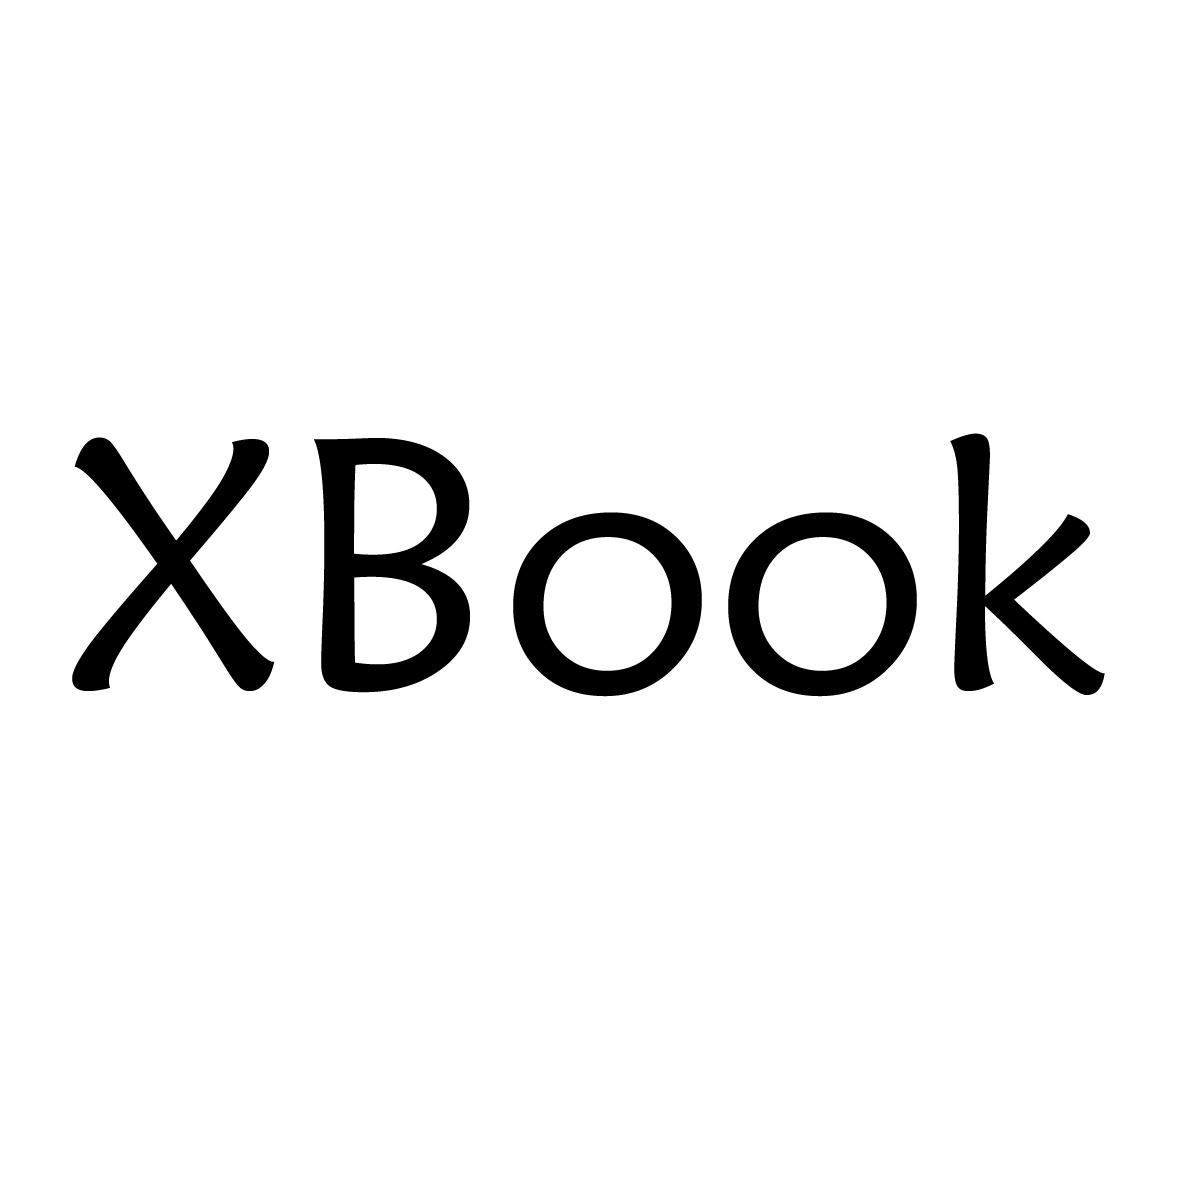 XBOOK